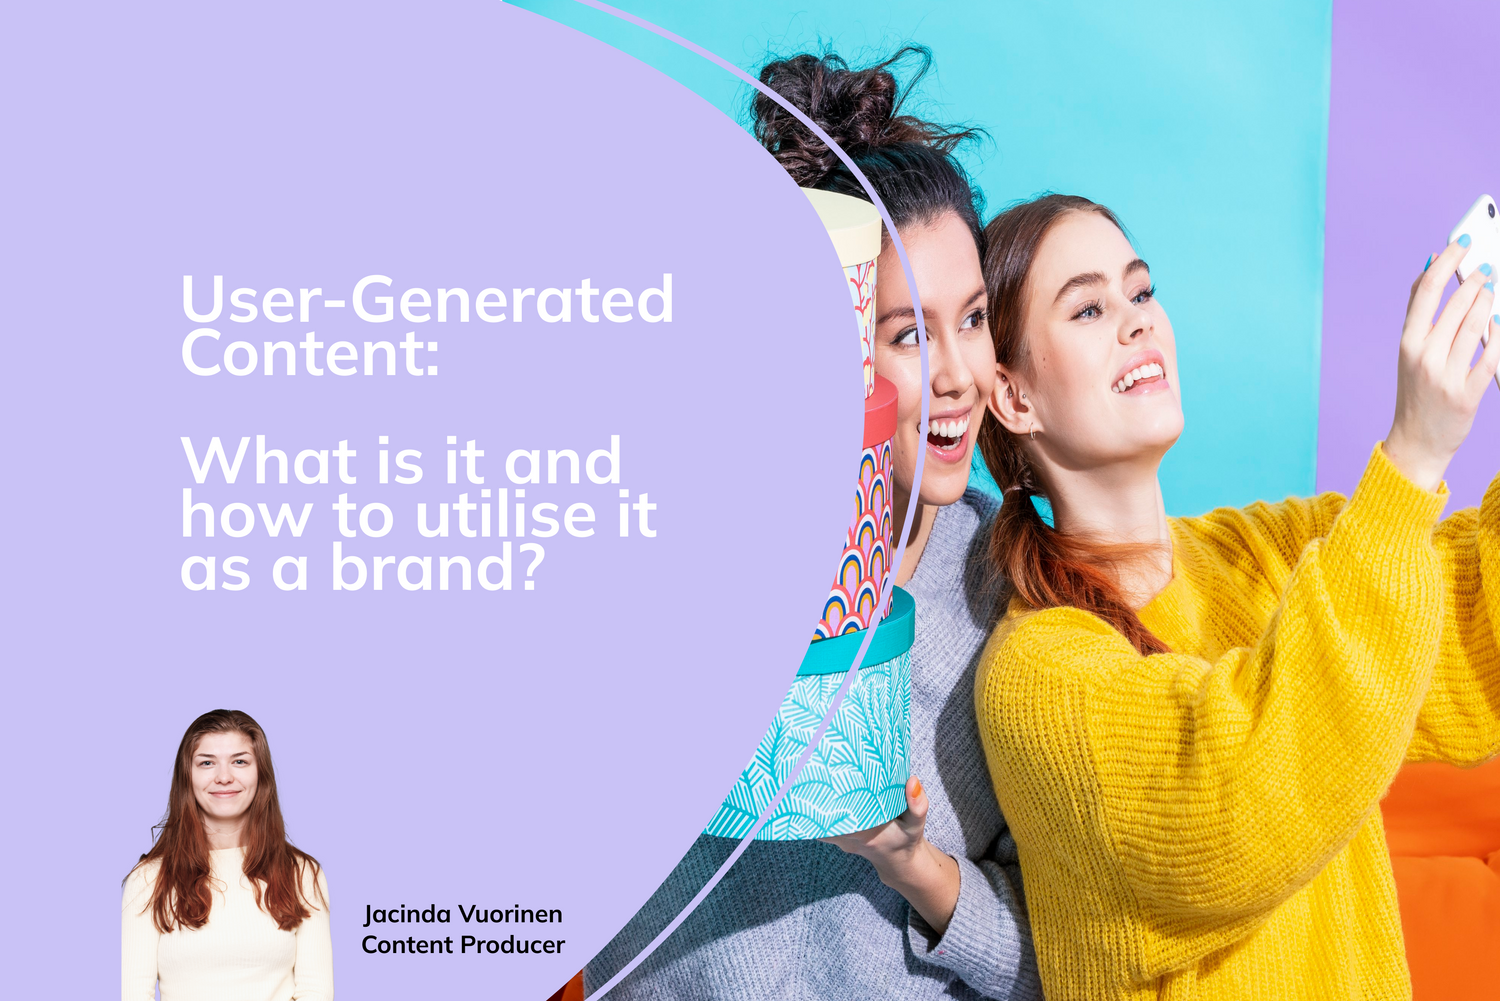 User-Generated Content: What is it and how to utilise it as a brand?